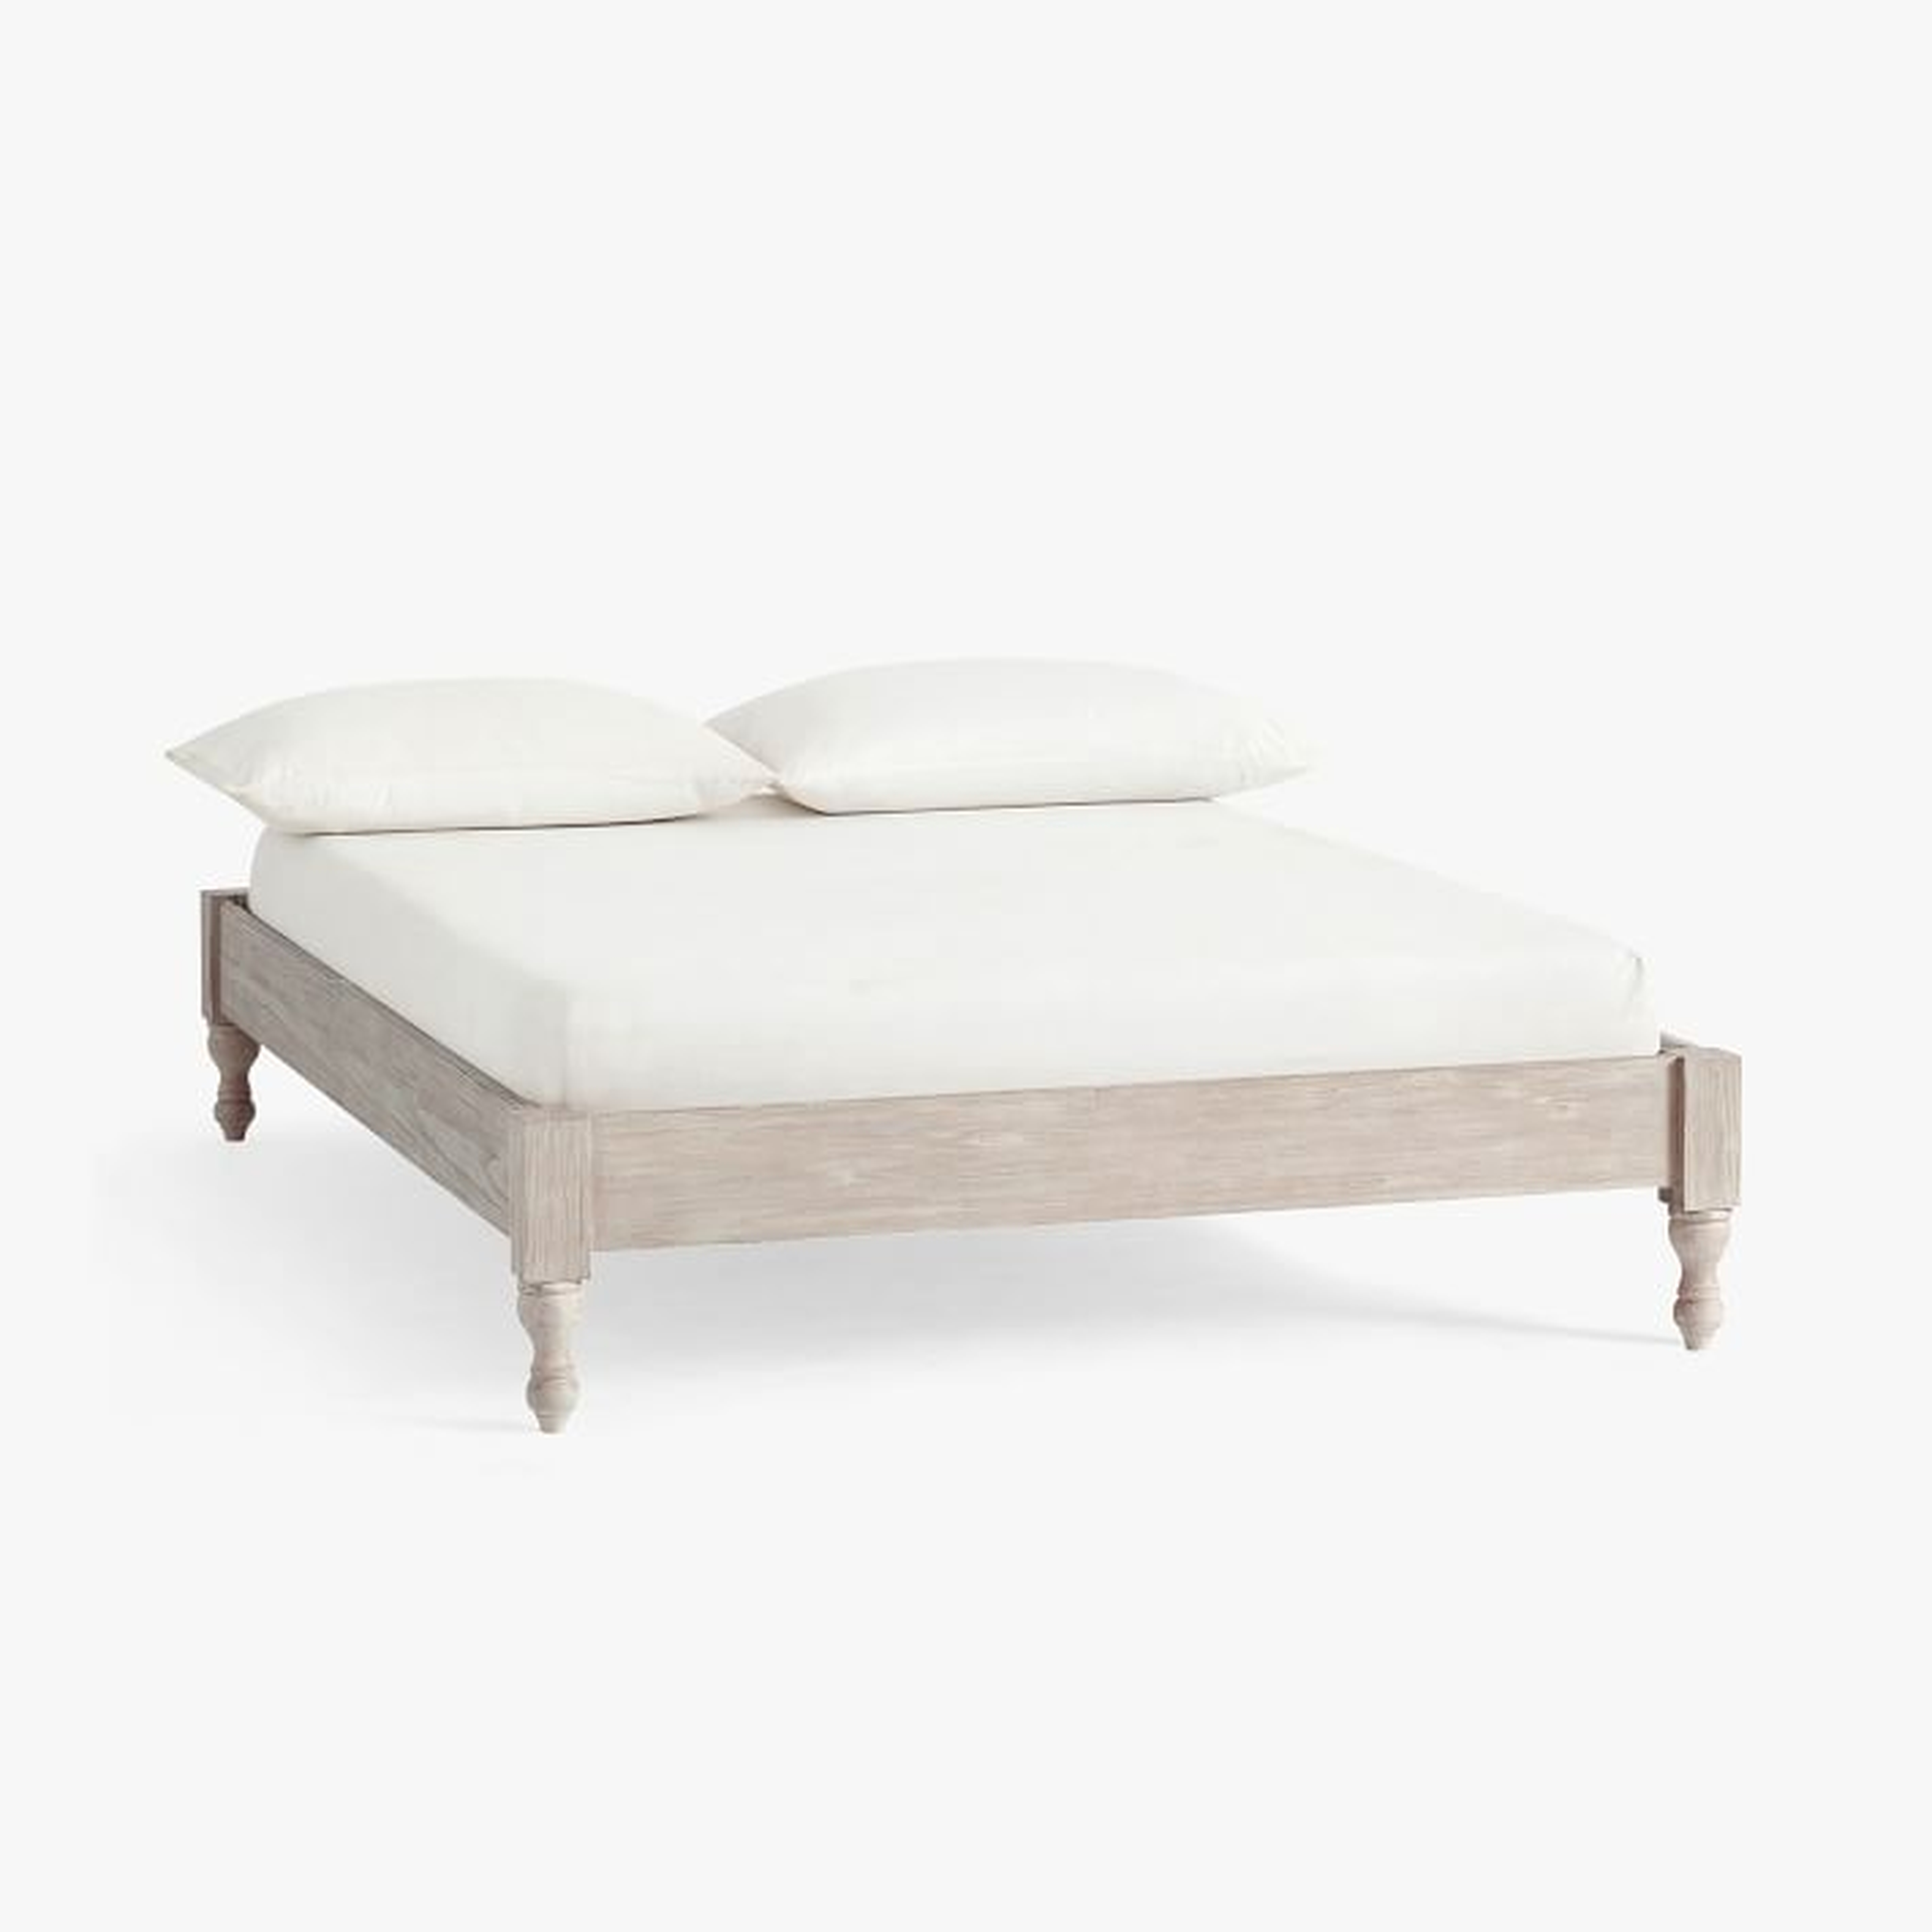 Bellevue Platform Bed, Twin, Weathered White - Pottery Barn Teen